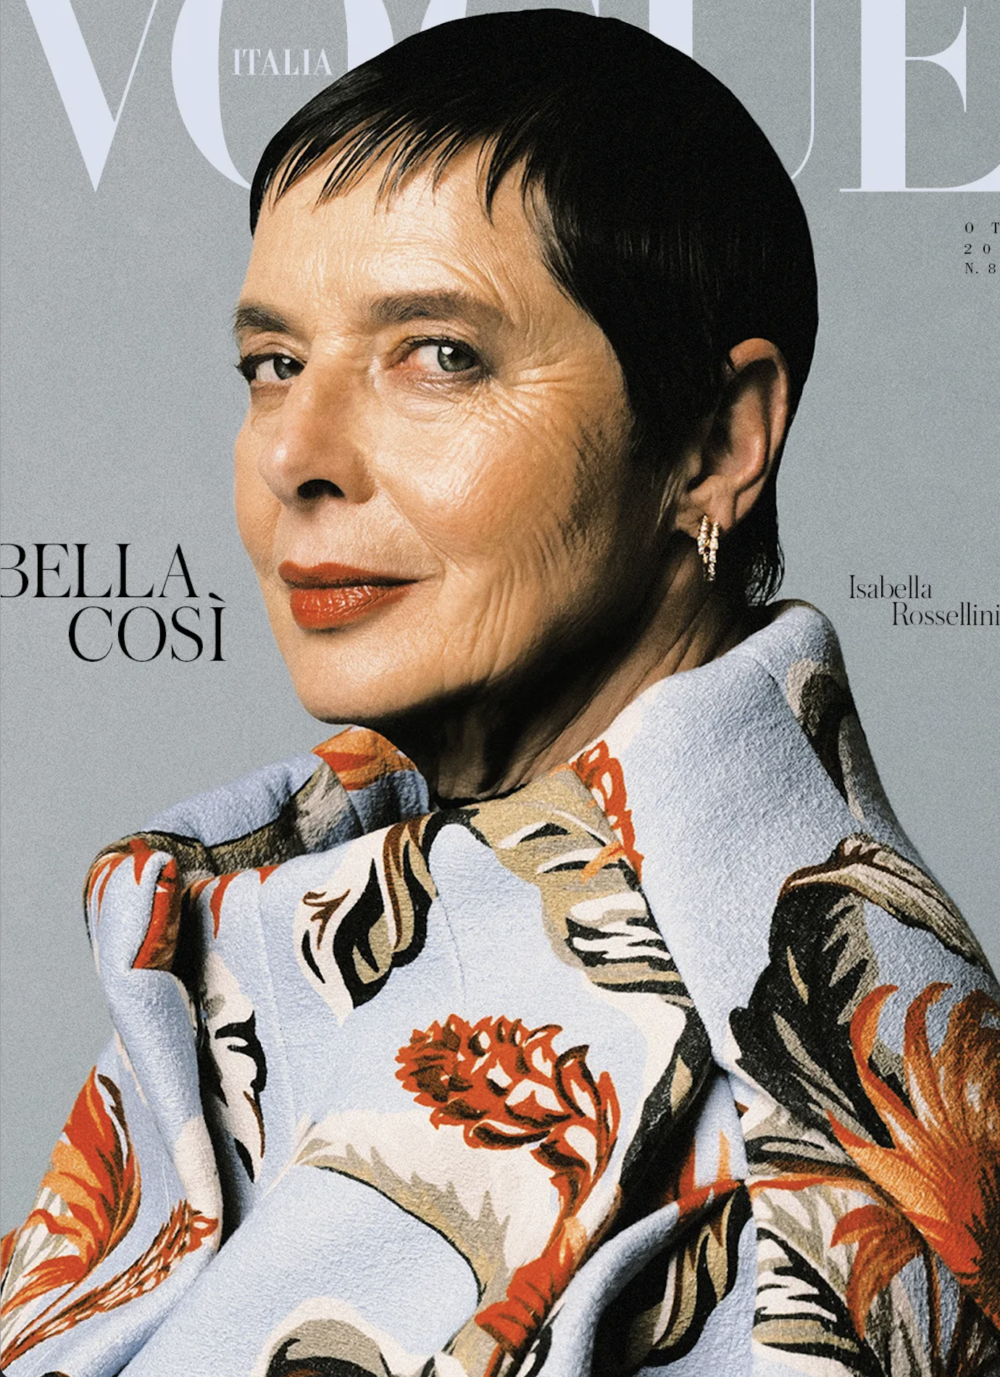 Isabella Rossellini on the cover of Italian Vogue